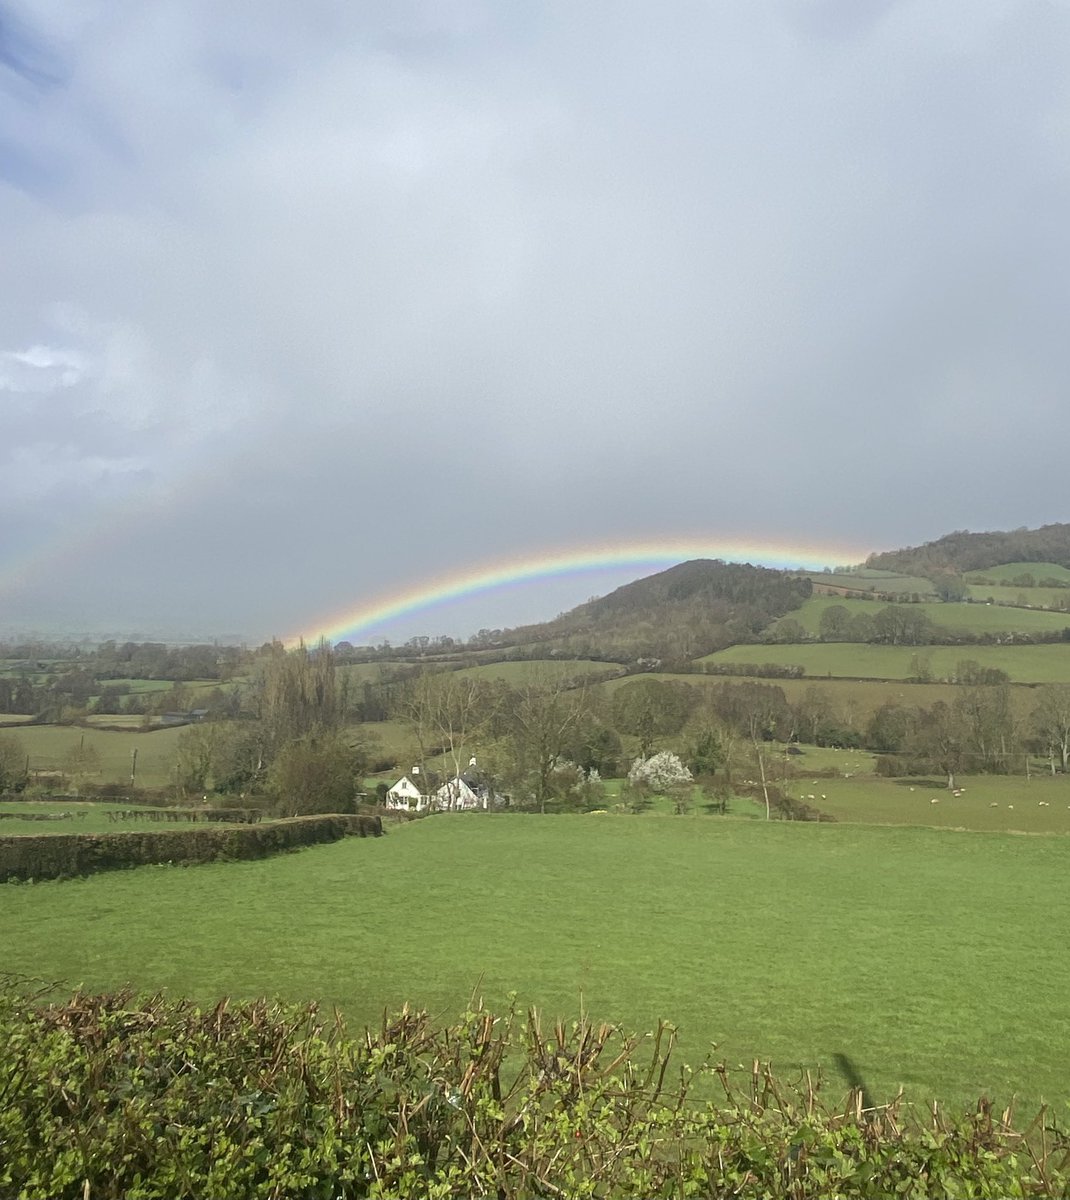 A very low #rainbow Caught it seems between hill and field A sudden burst of brightness in amongst all the #rain With a faint second one just above Well worth the stop #NaturePhotograhpy #Herefordshire @bbchw @YourHereford1 @herefordtimes @VisitHfds #Marches